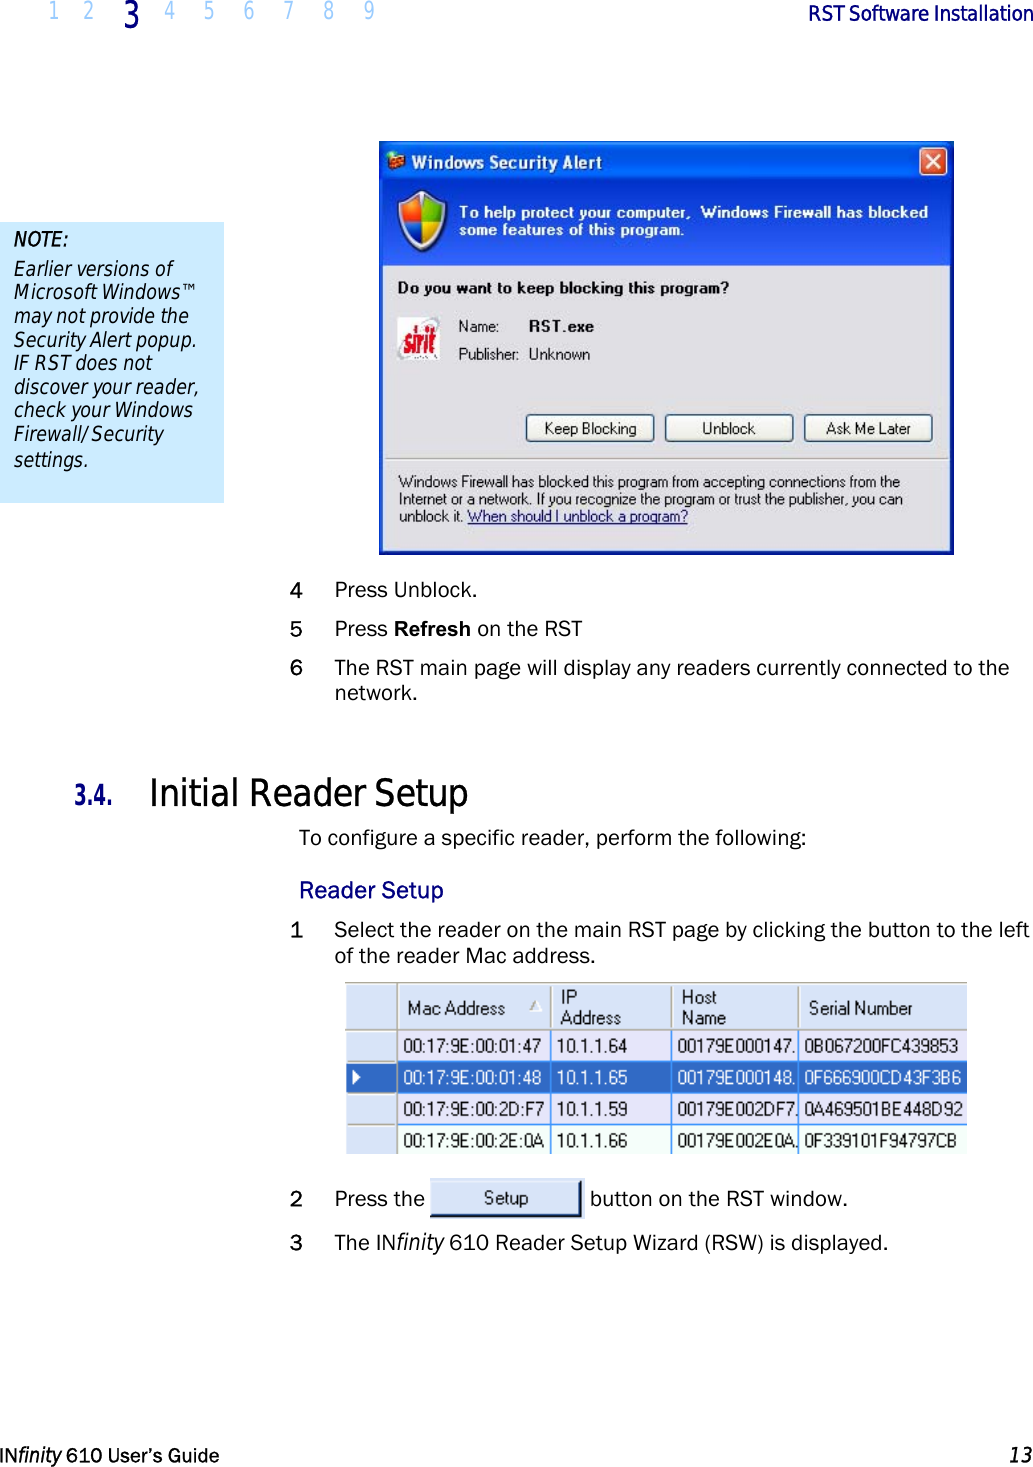  1 2 3  4 5 6 7 8 9        RST Software Installation   INfinity 610 User’s Guide  13   4 Press Unblock. 5 Press Refresh on the RST 6 The RST main page will display any readers currently connected to the network.  3.4. Initial Reader Setup To configure a specific reader, perform the following: Reader Setup 1 Select the reader on the main RST page by clicking the button to the left of the reader Mac address.  2 Press the  button on the RST window. 3 The INfinity 610 Reader Setup Wizard (RSW) is displayed. NOTE: Earlier versions of Microsoft Windows™ may not provide the Security Alert popup. IF RST does not discover your reader, check your Windows Firewall/Security settings. 